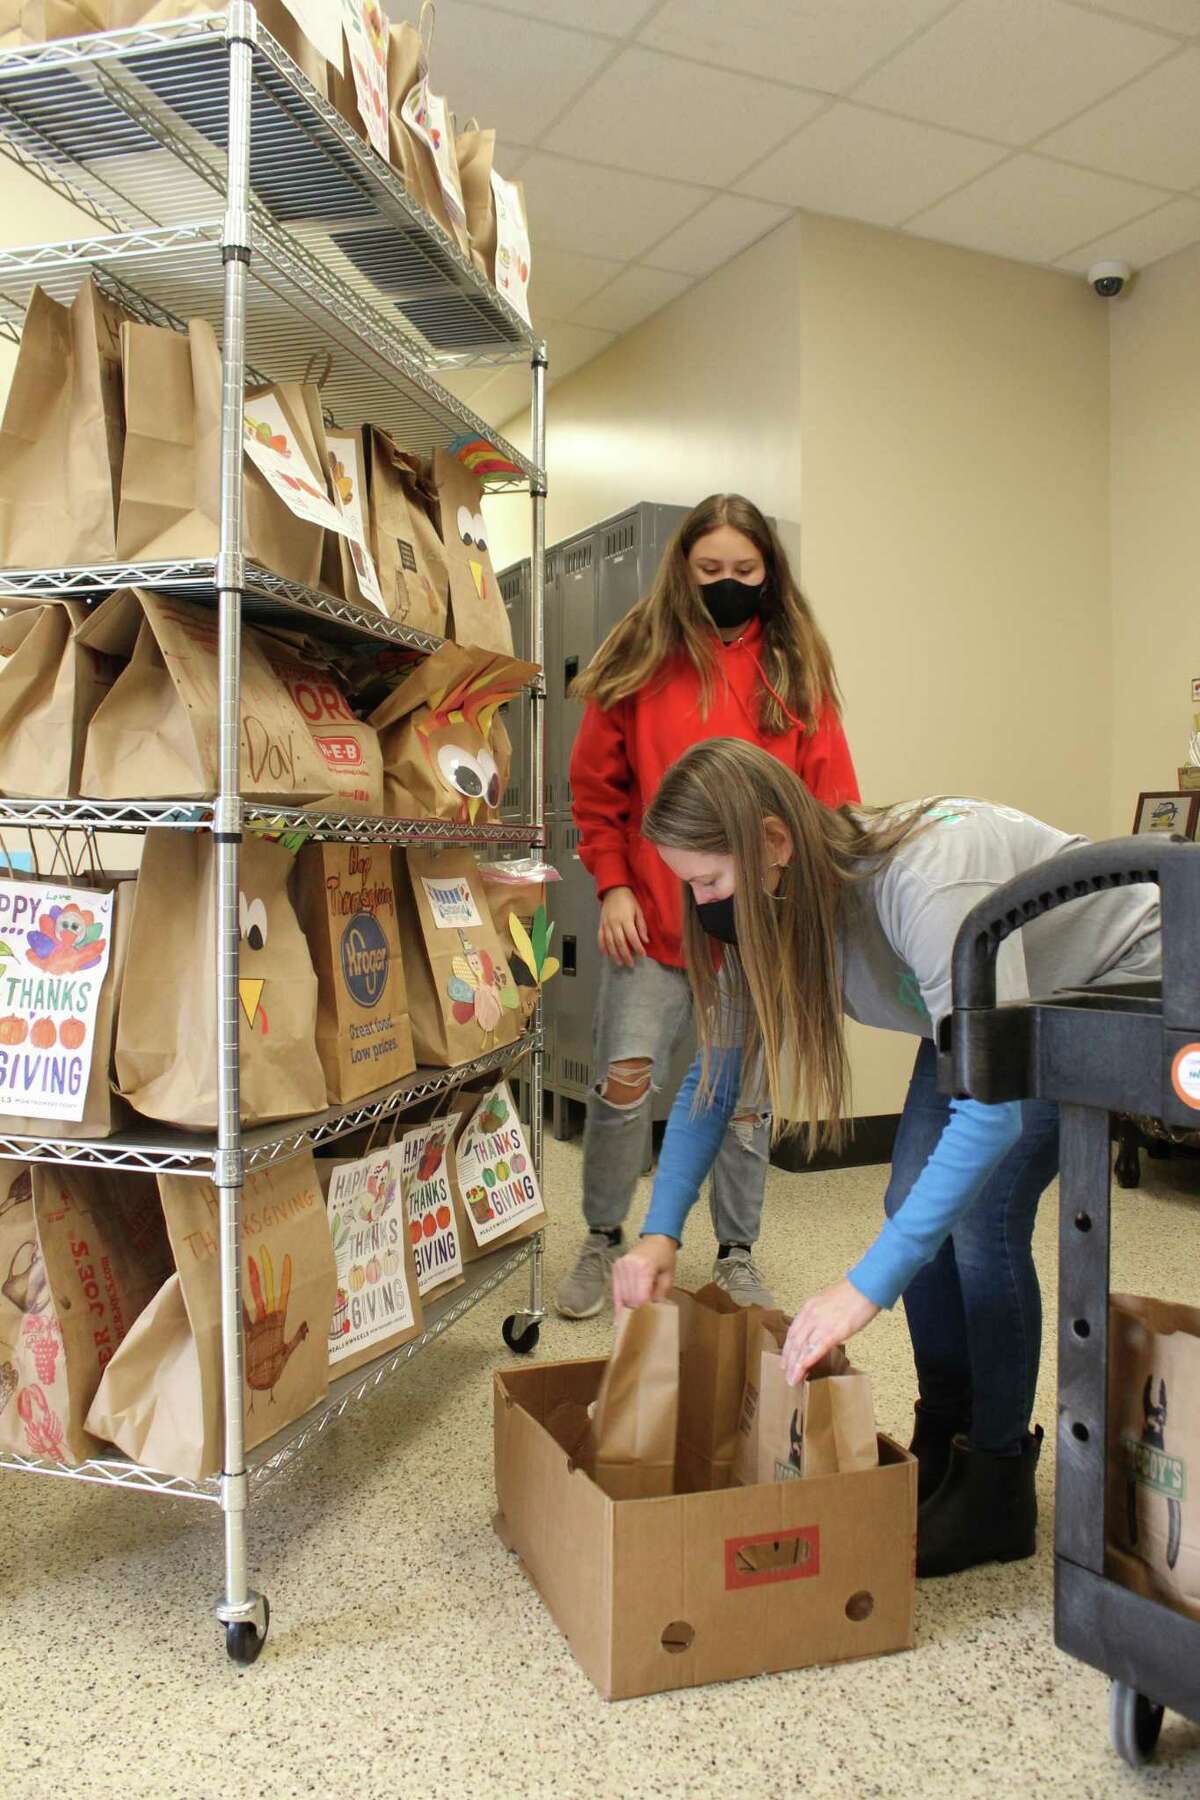 This year, Meals on Wheels Montgomery County will be delivering 692 meal bags to clients on Thanksgiving. Rylan and Misti Burgess, volunteers with the National Charity League Montgomery Monarchs, sort the Thanksgiving meal bags on Nov. 24, 2020.